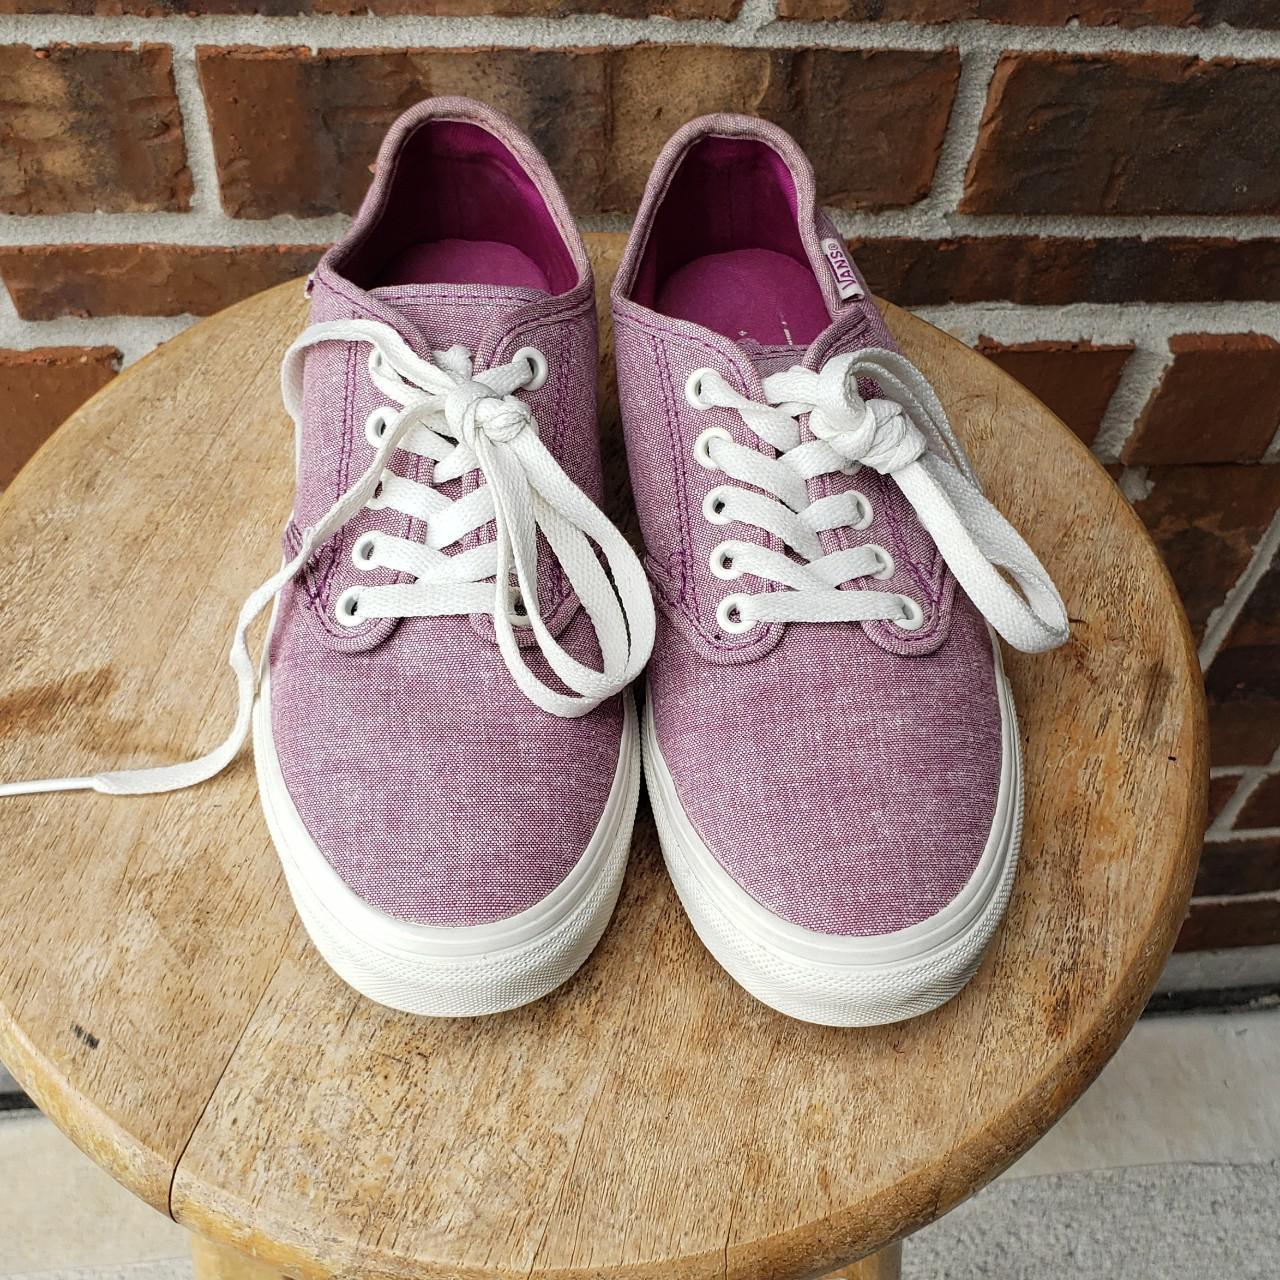 Product Image 2 - Vans Low Tops

♤ purple lowtops